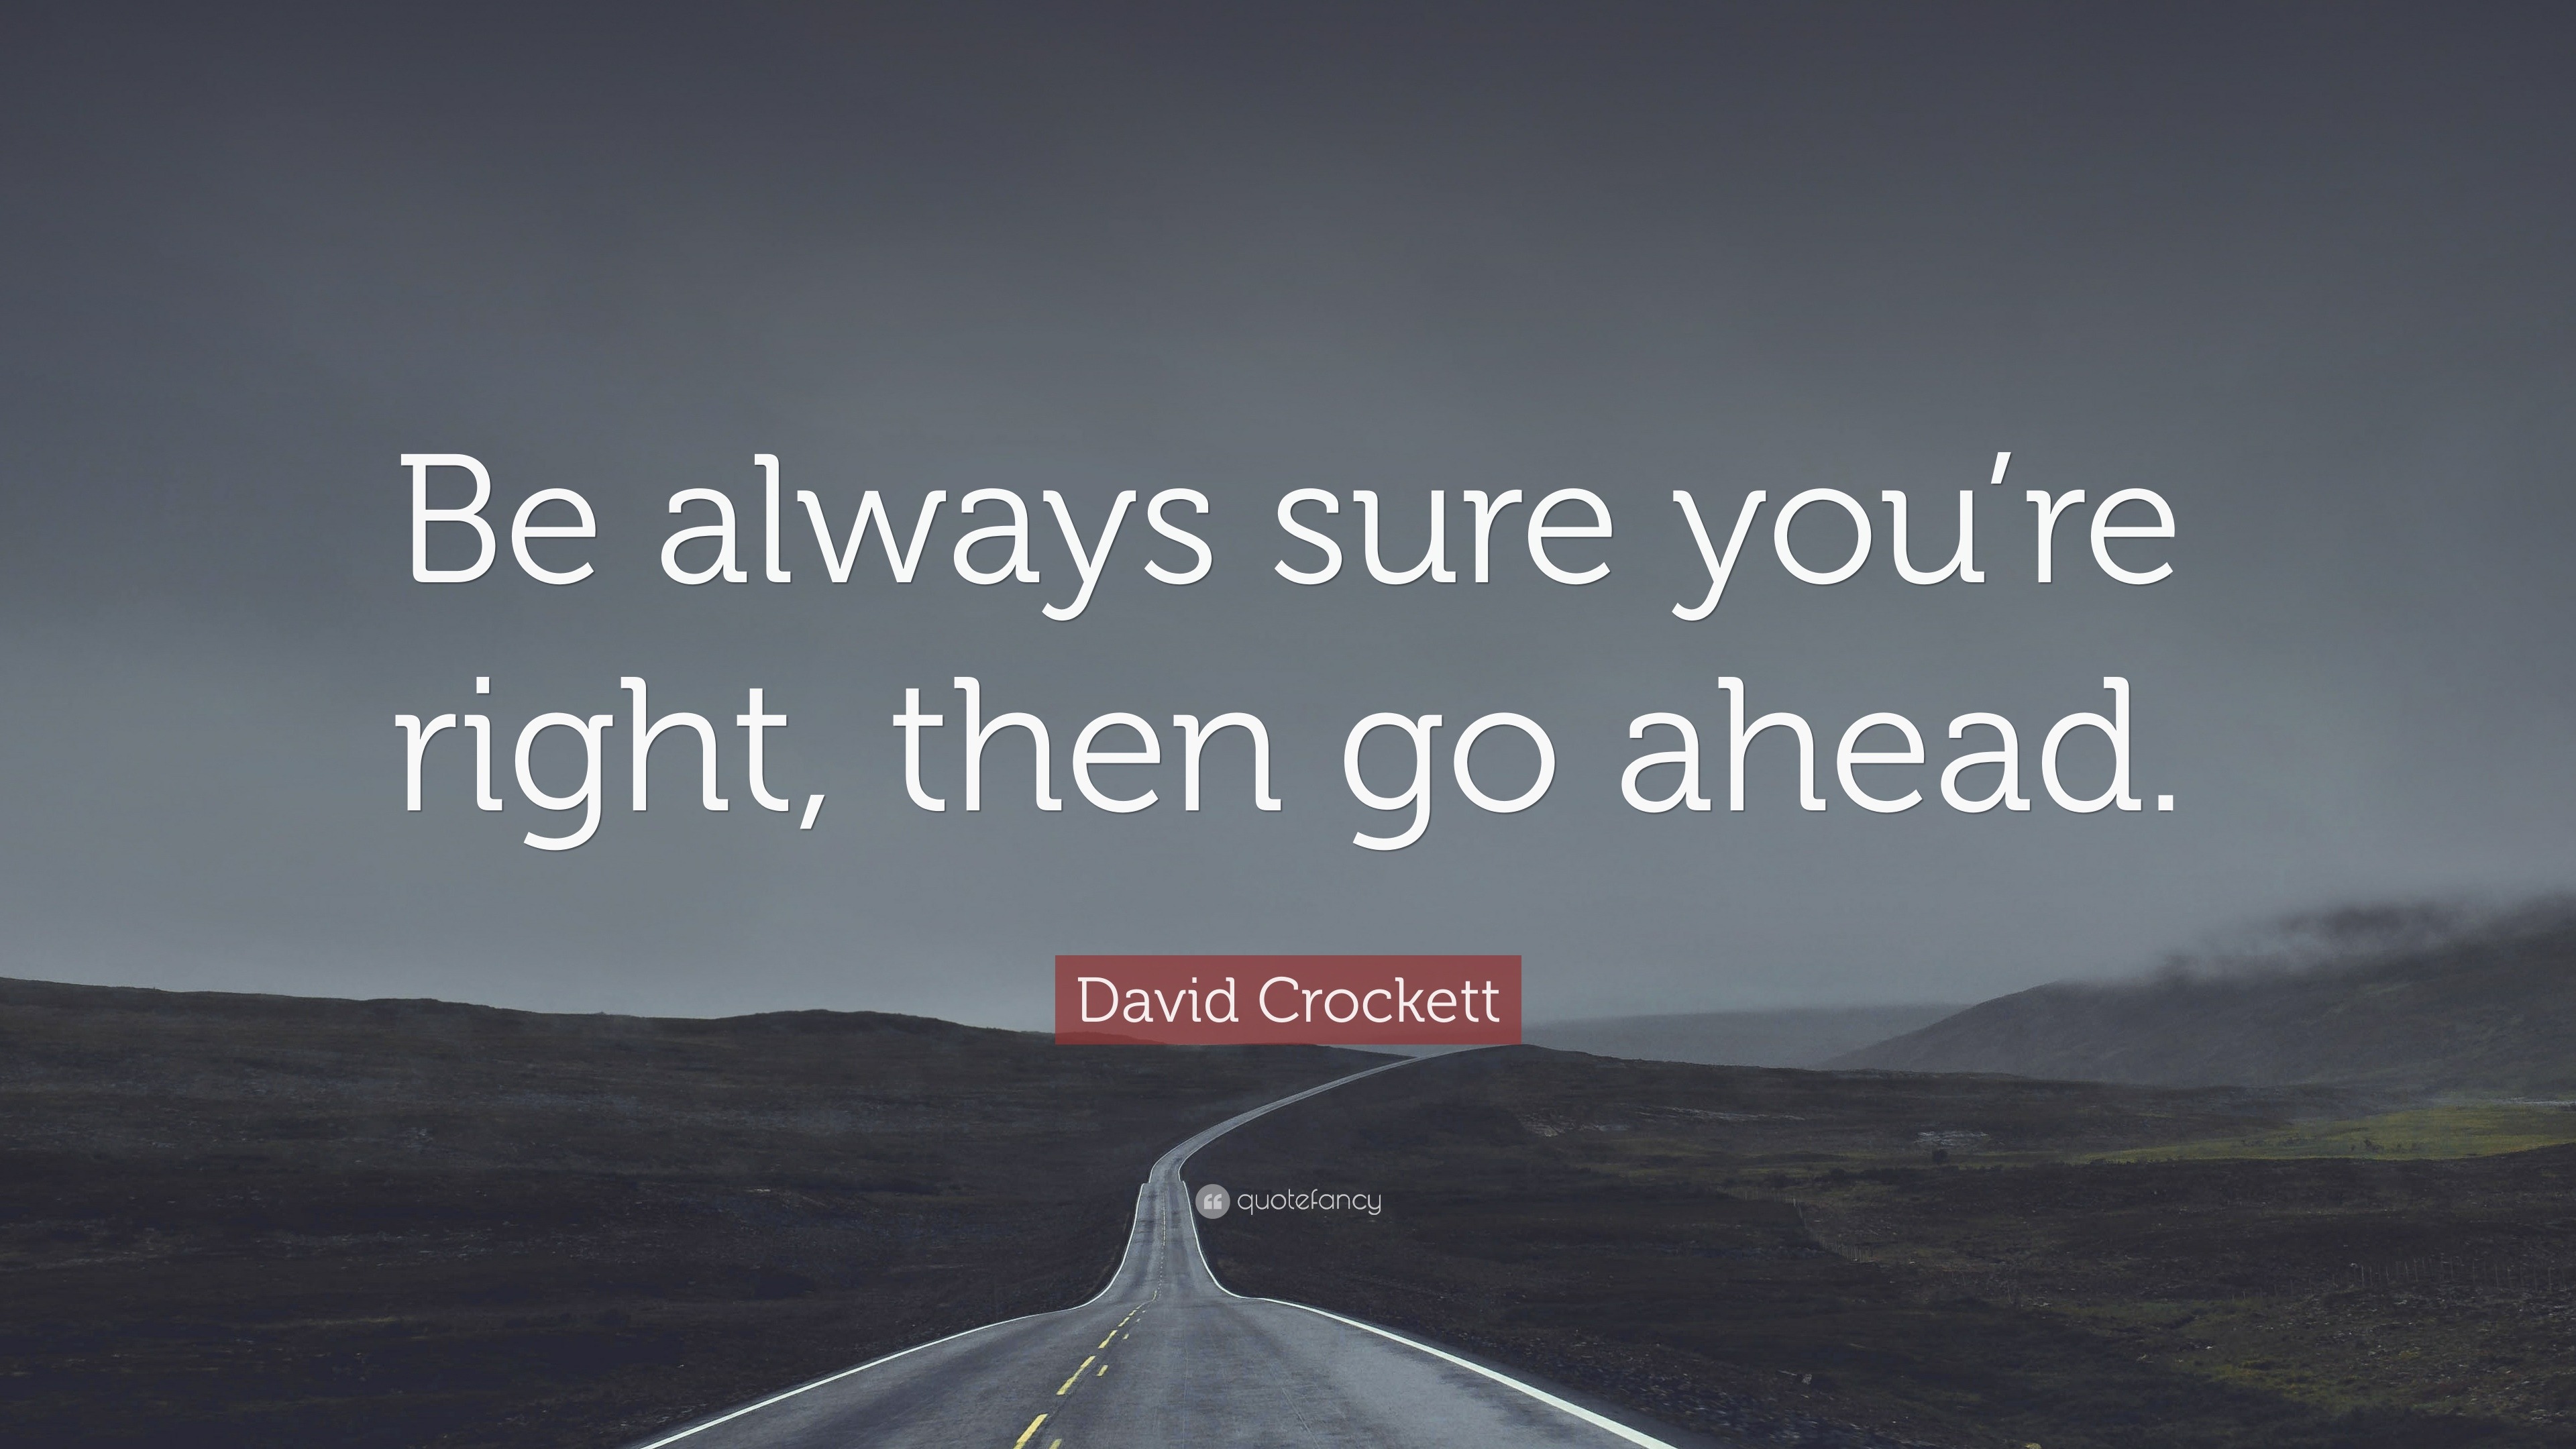 Can be sure that this. Go ahead. Be always ahead. Go right ahead. Always go ahead.